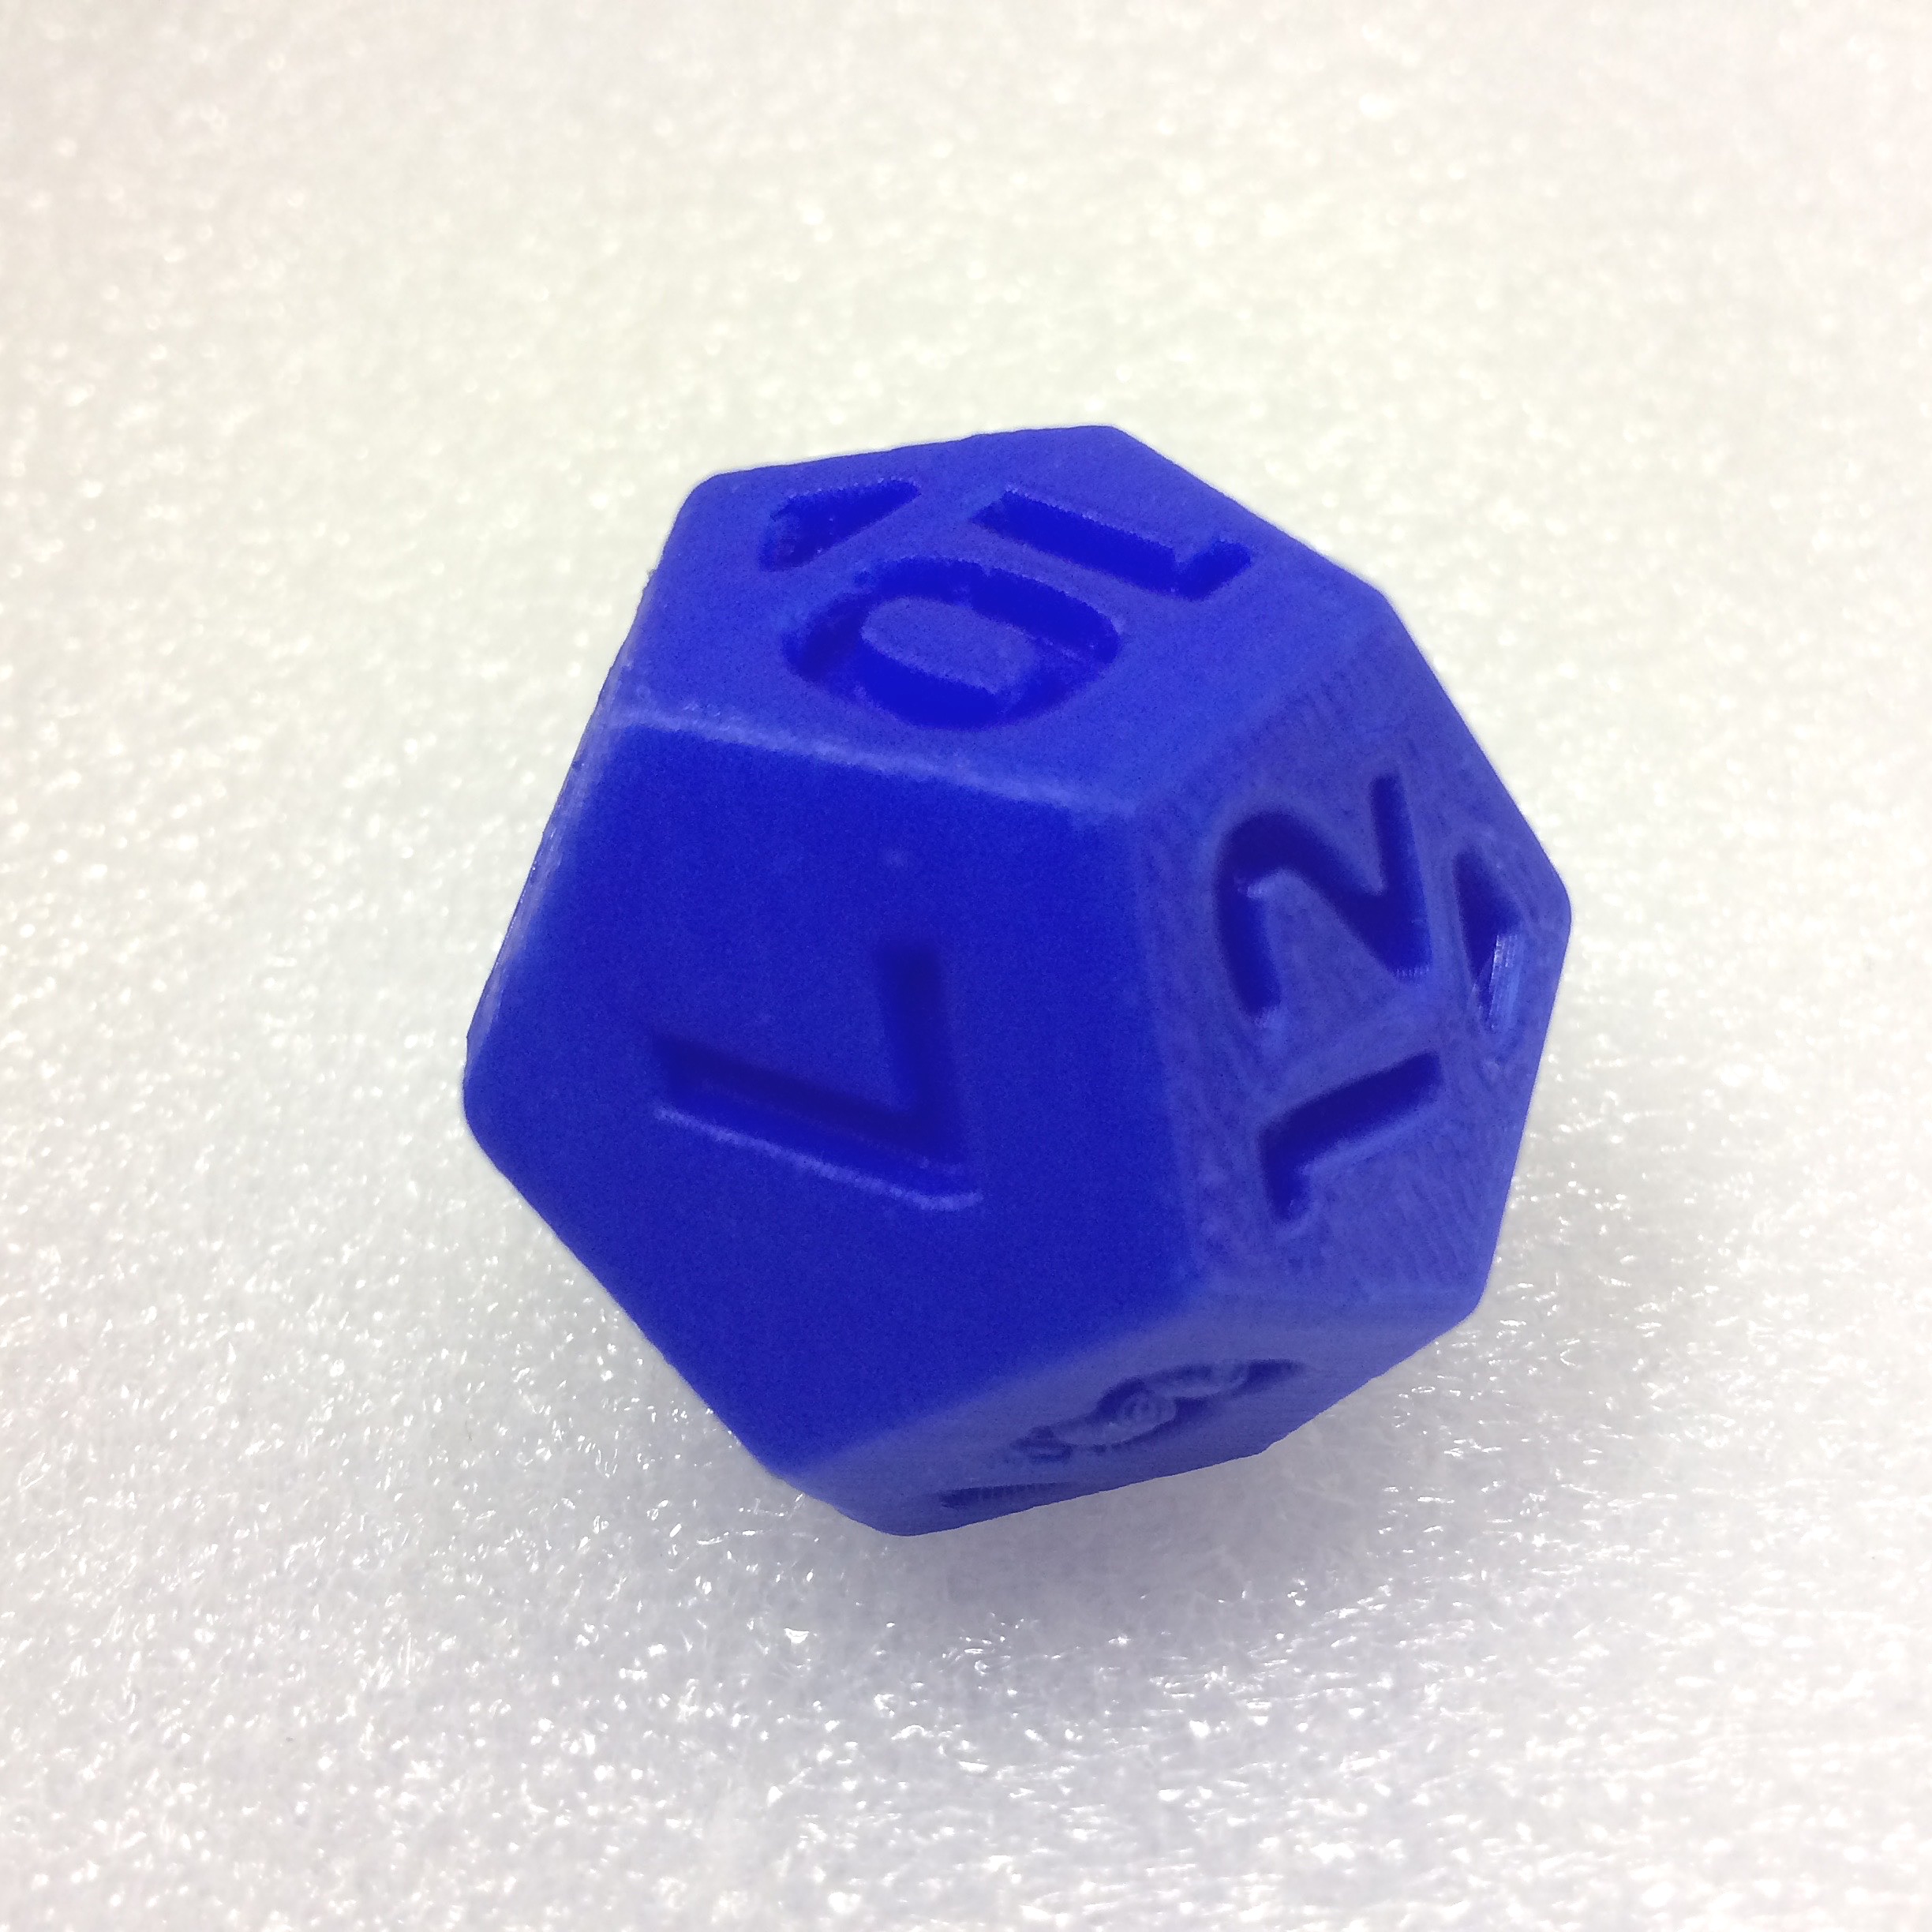 Dice - 12 sided (Replaces two regular dice... plus adds outcomes!)